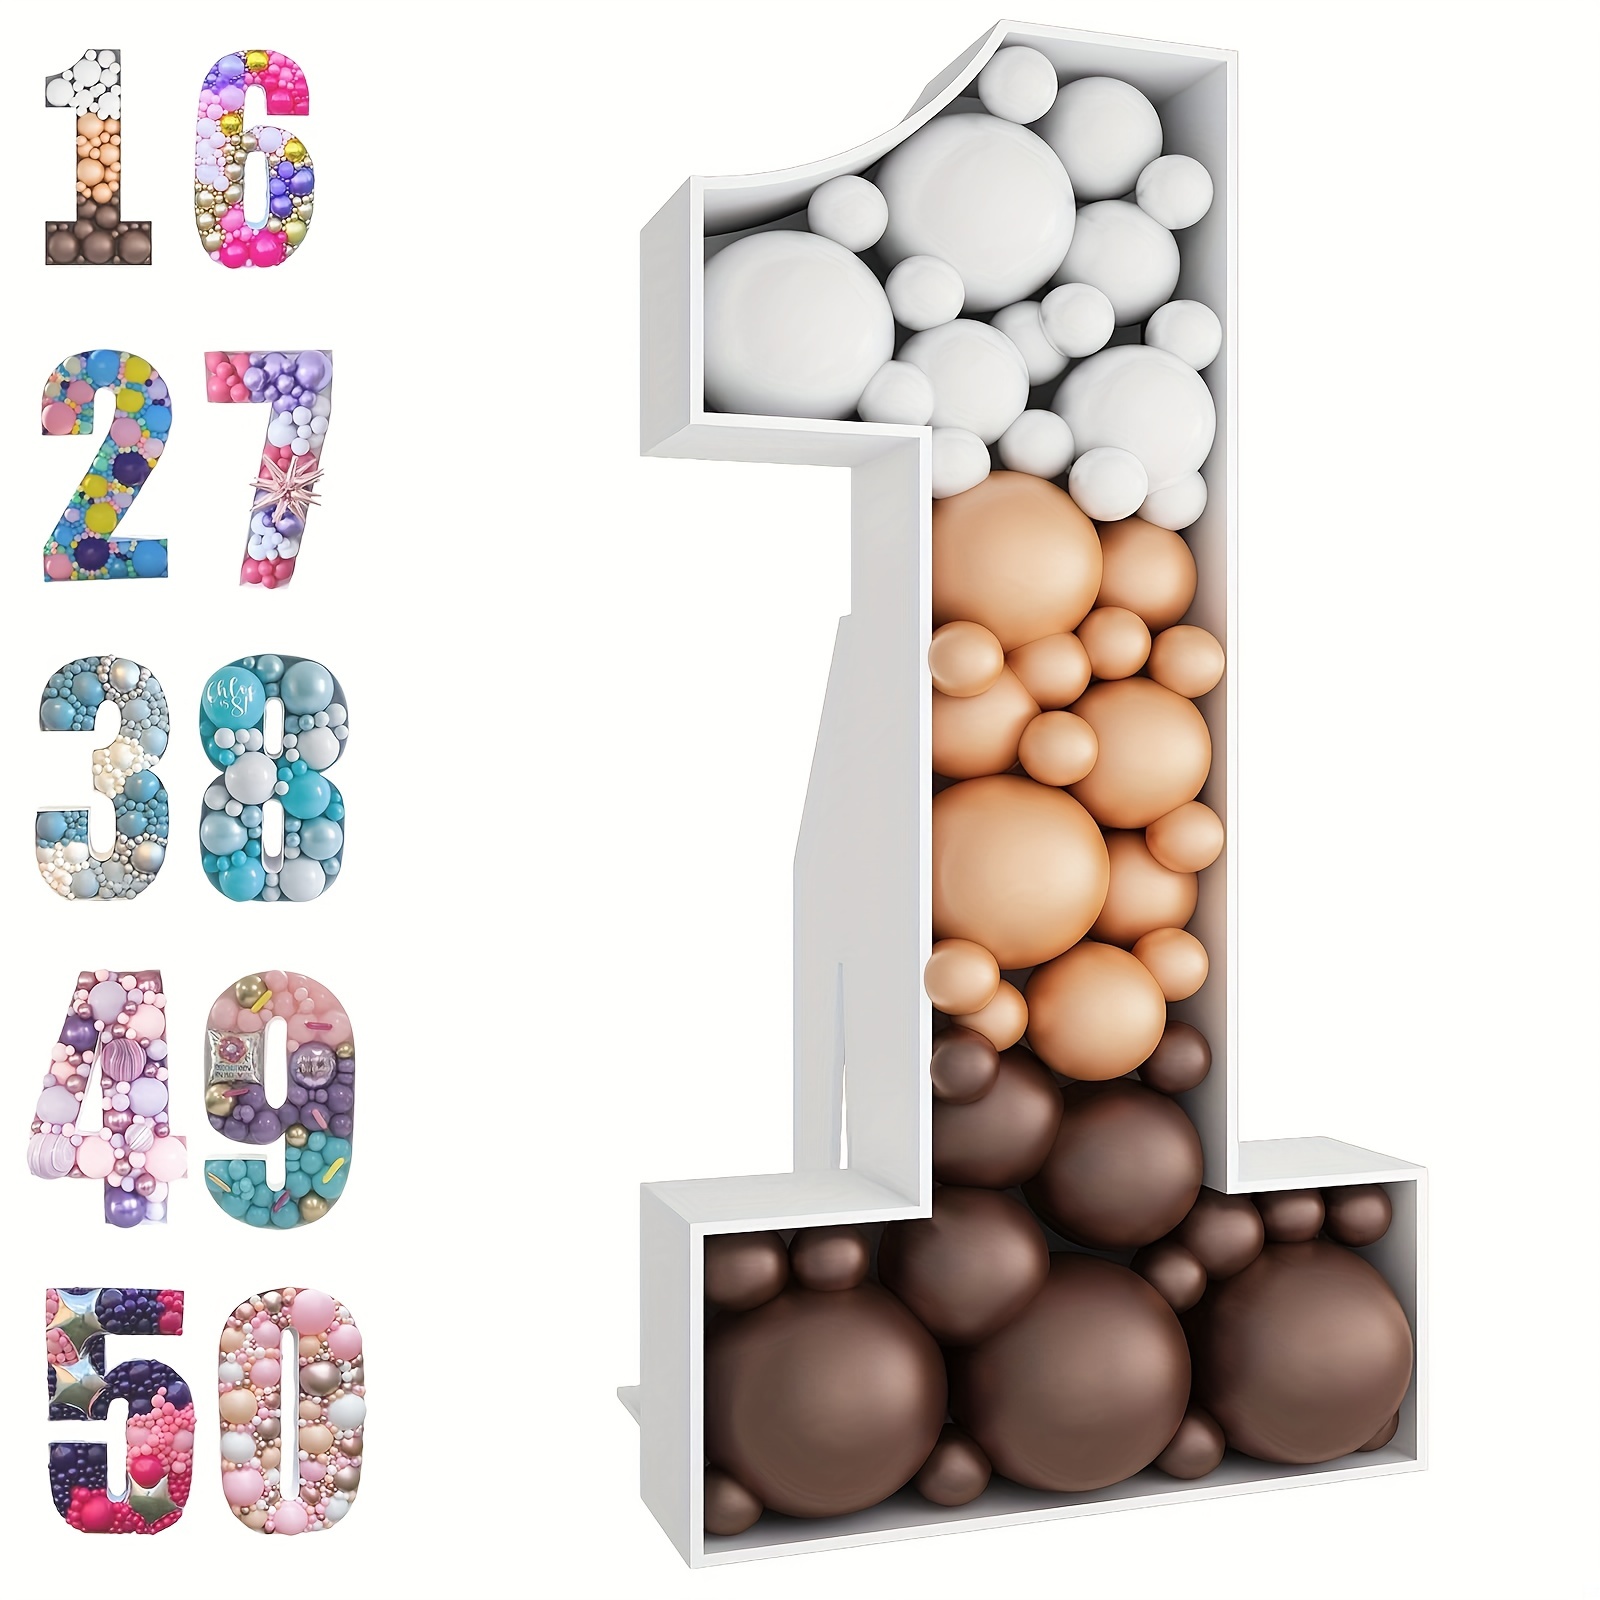 5FT Mosaic Number for Balloons, Giant Mosaic Balloon Frame for Party Decor,  Marquee Light up Number, Large Cardboard Number Letters for Birthday Party  decoration, Balloon Art Kits Number Balloon 2 